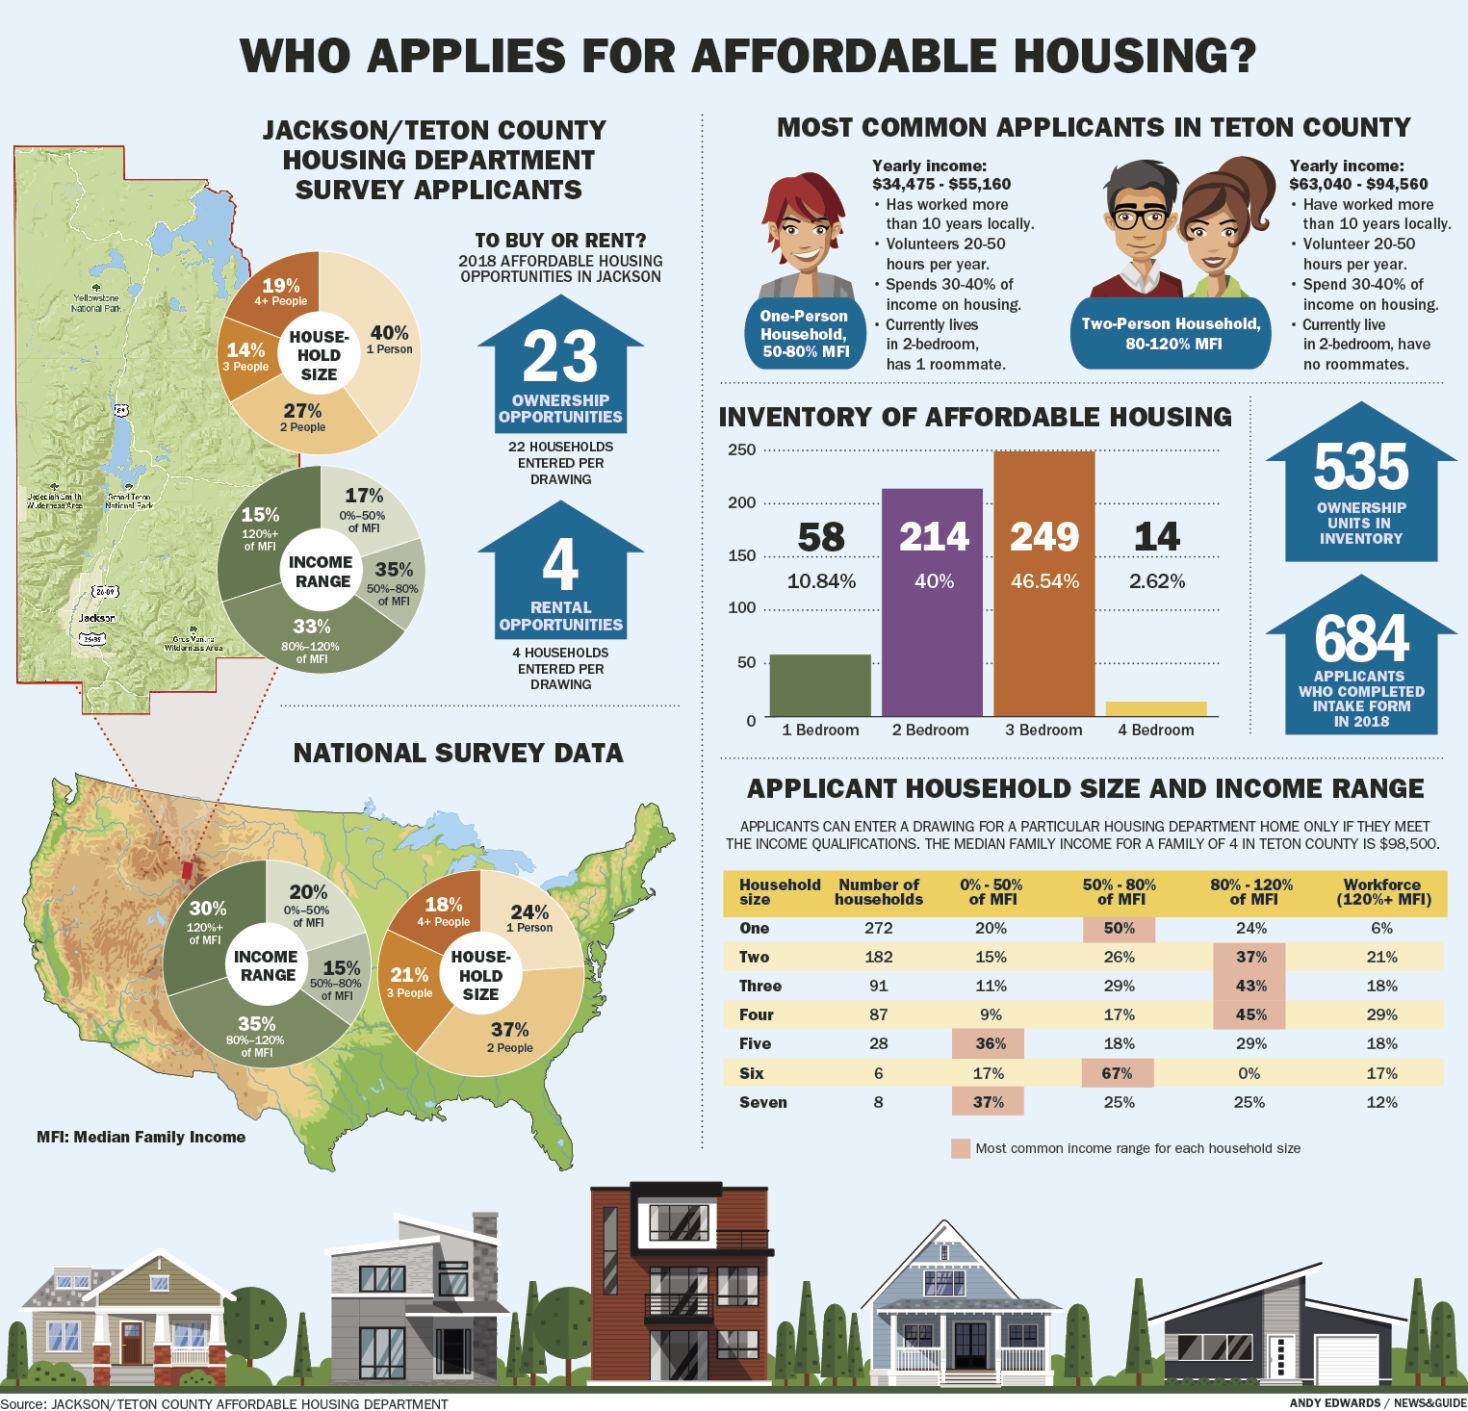 JHN&G, “Singles dominate those wanting affordable housing”